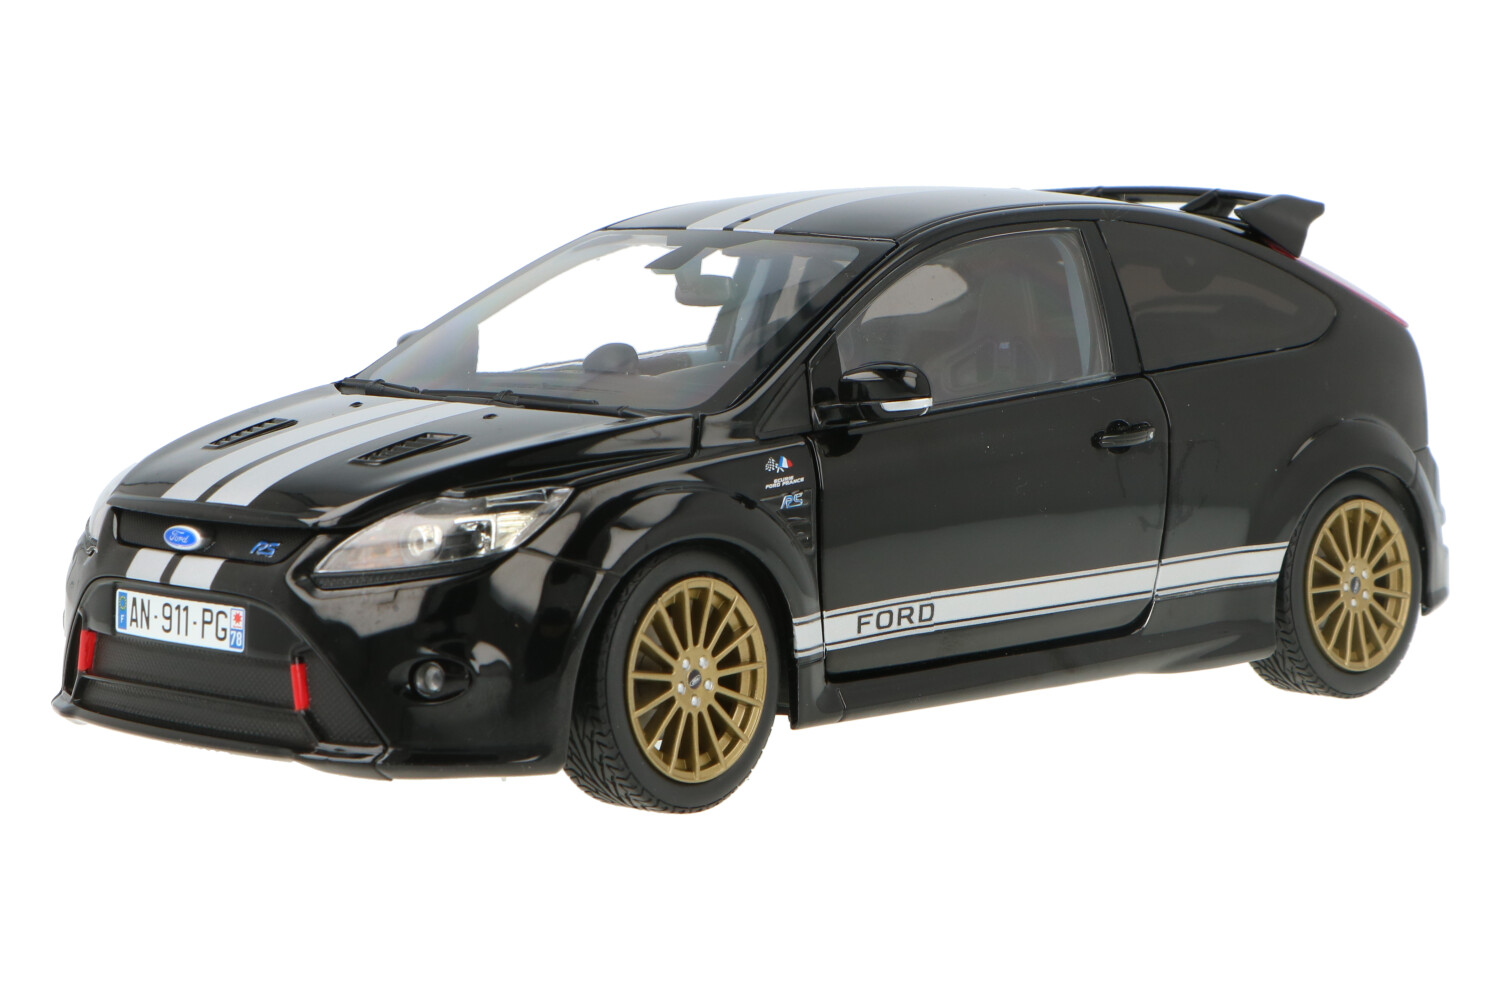 Ford-Focus-RS-100080066_13154012138109896Ford-Focus-RS-100080066_Houseofmodelcars_.jpg